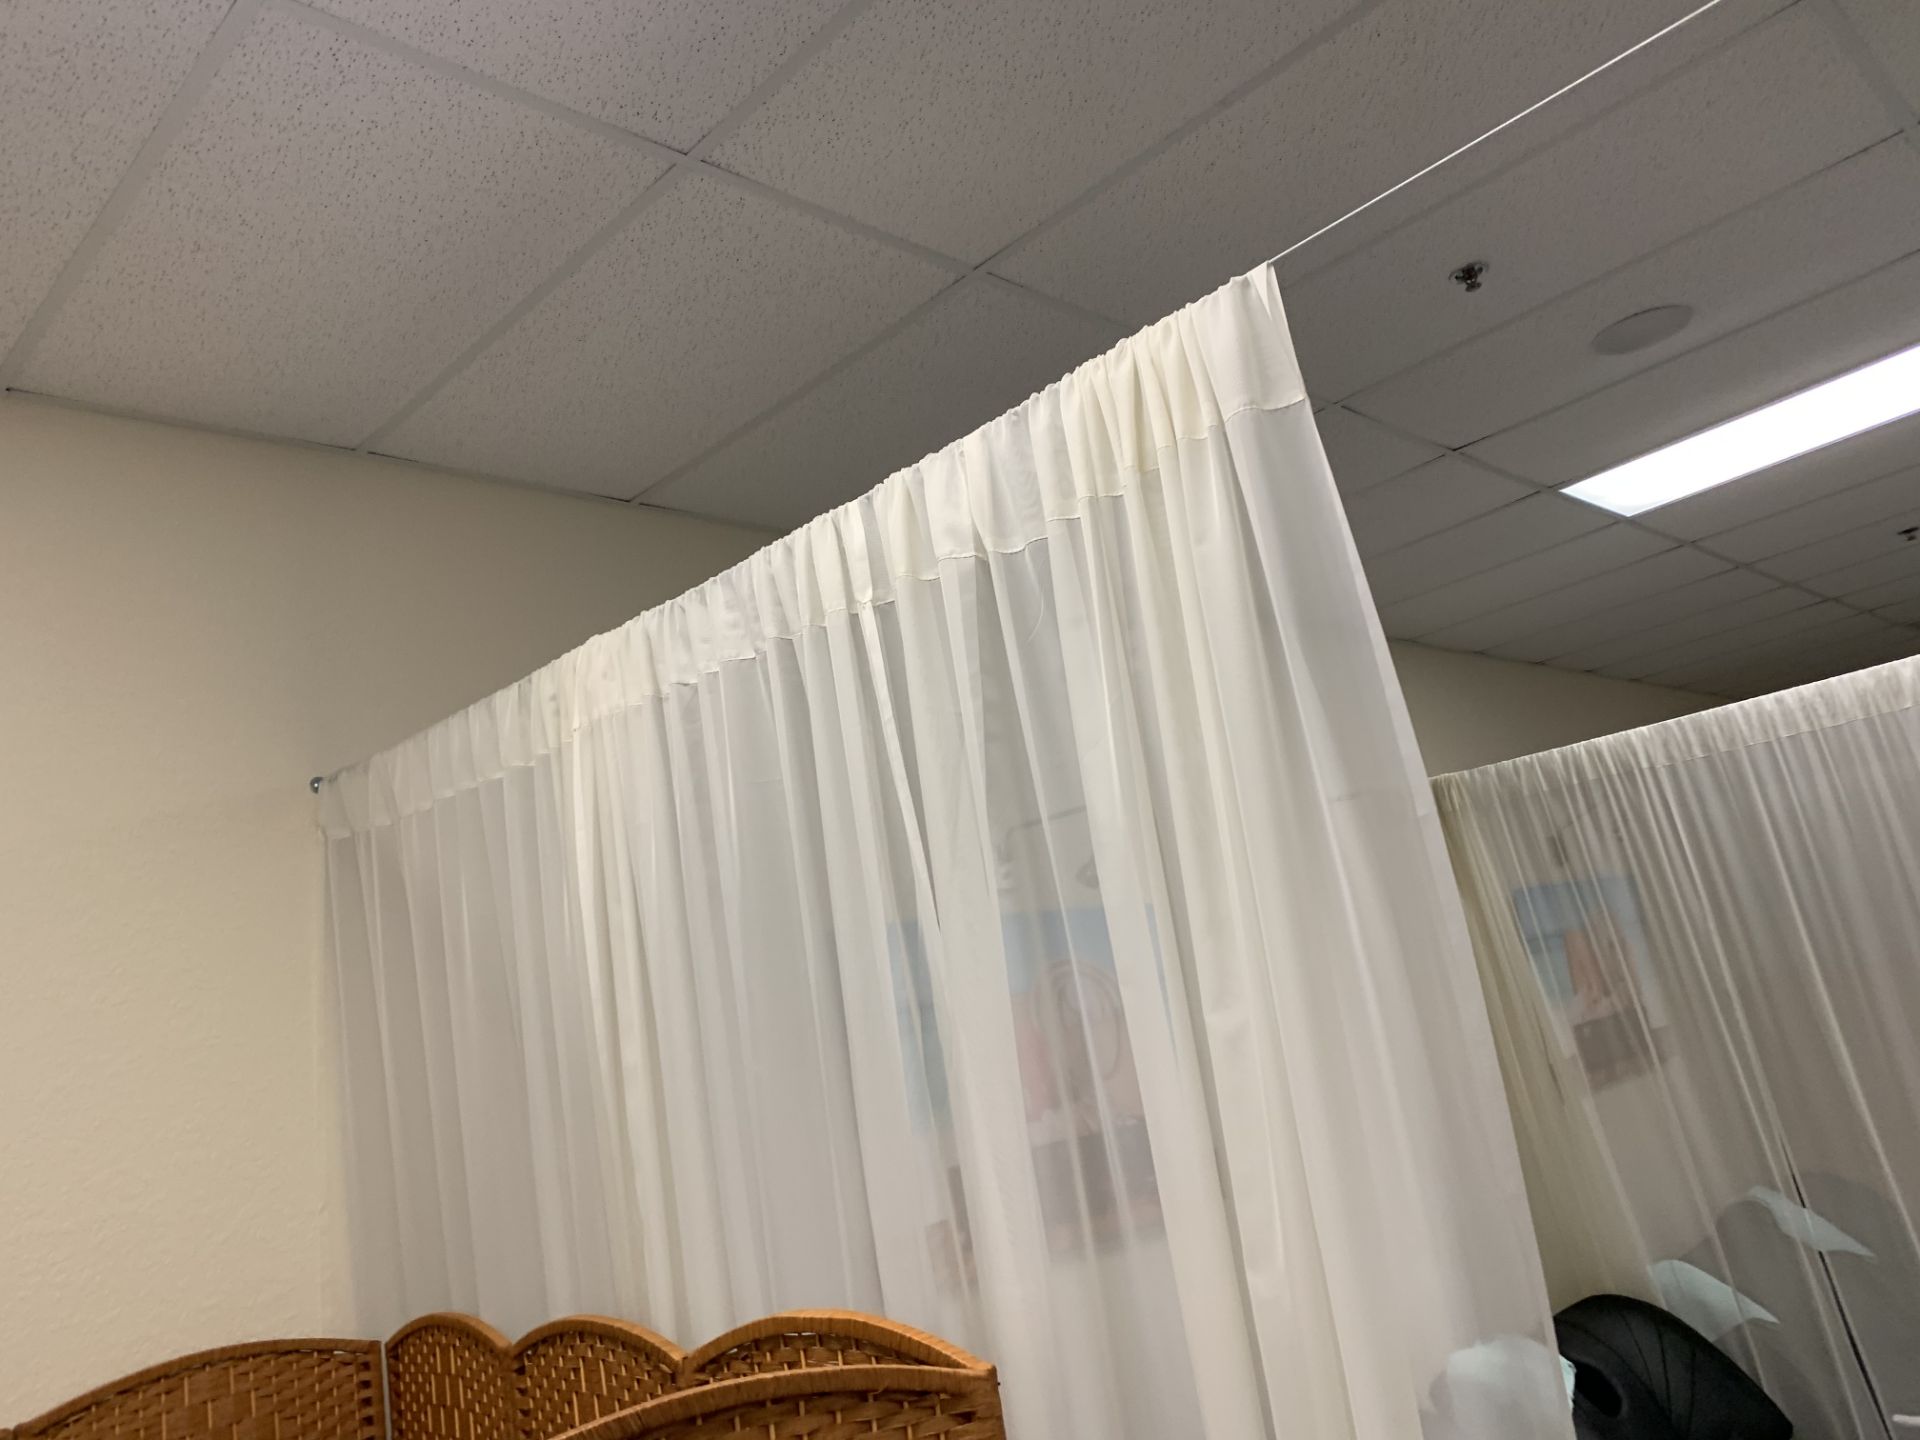 MOUNTED WIRE DIVIDERS WITH CURTAINS - Image 2 of 3